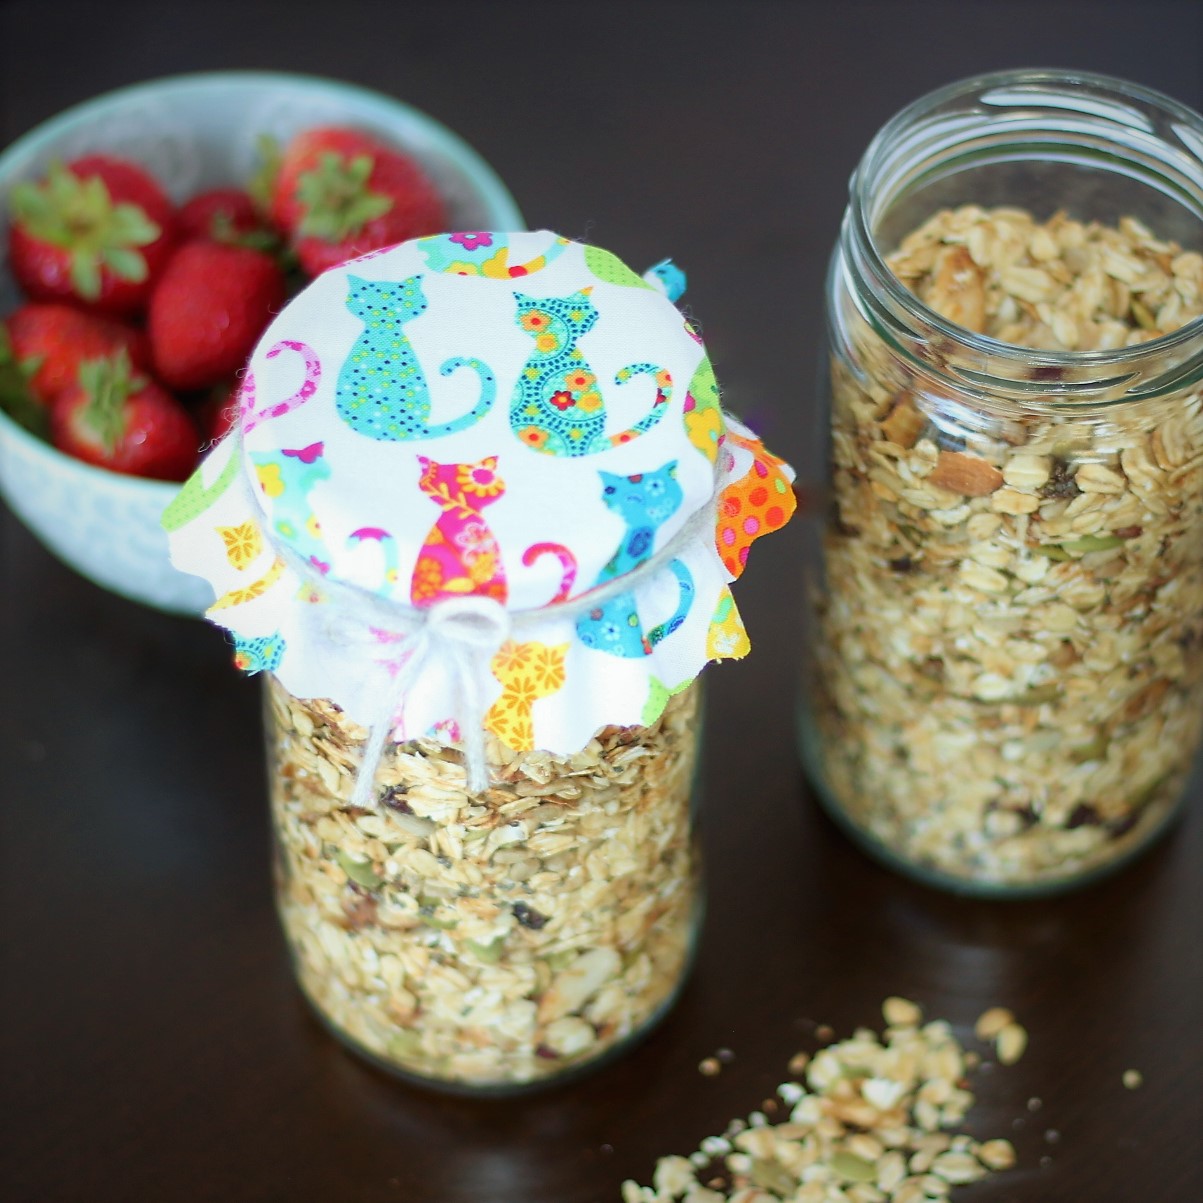 Muesli stored in tall jars trimmed with fabric for gifting.